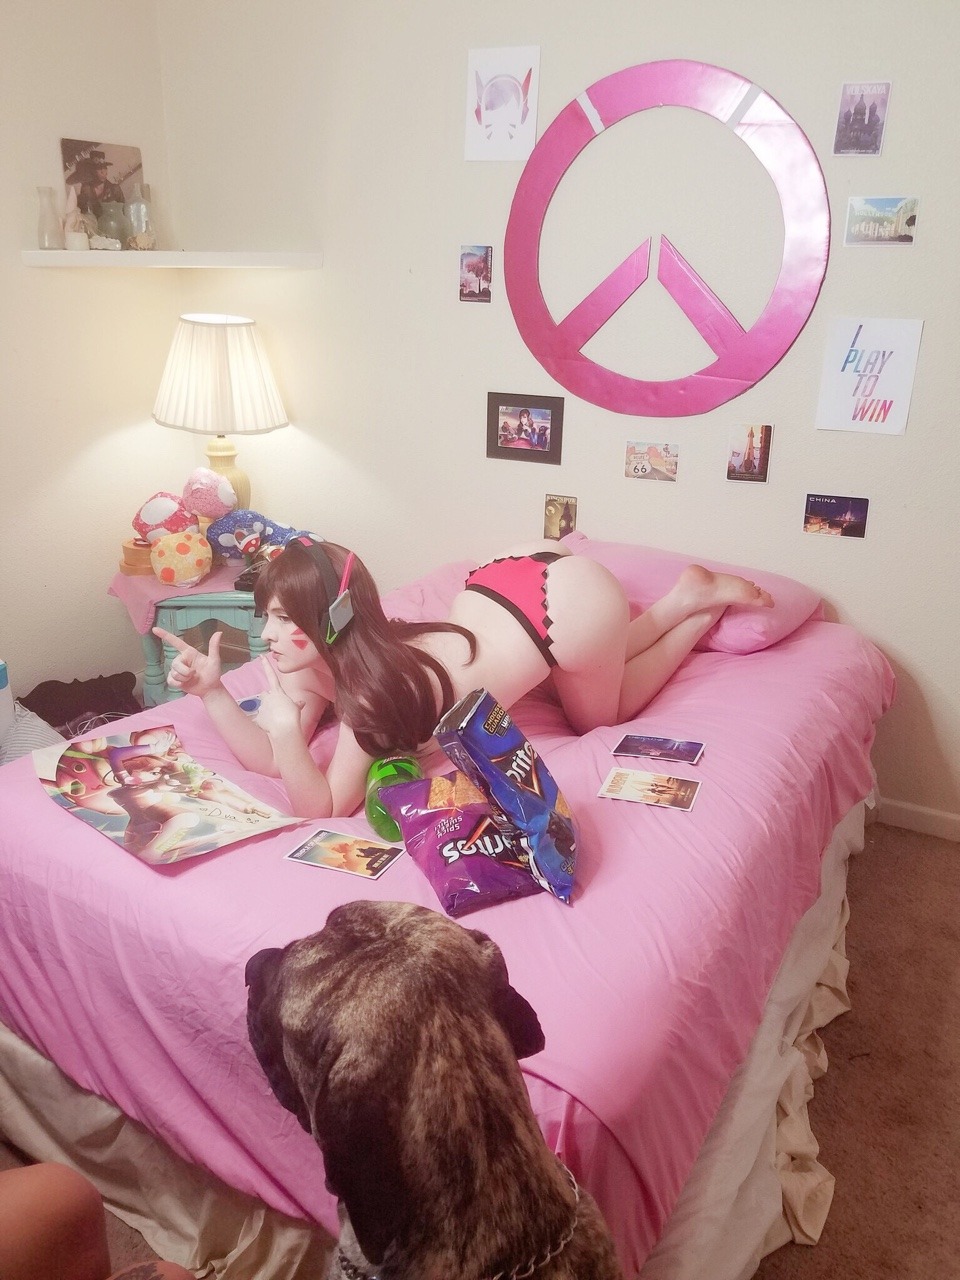 nsfwfoxydenofficial: I play to win! 💗  I have a lot of fun being D.va, I can’t